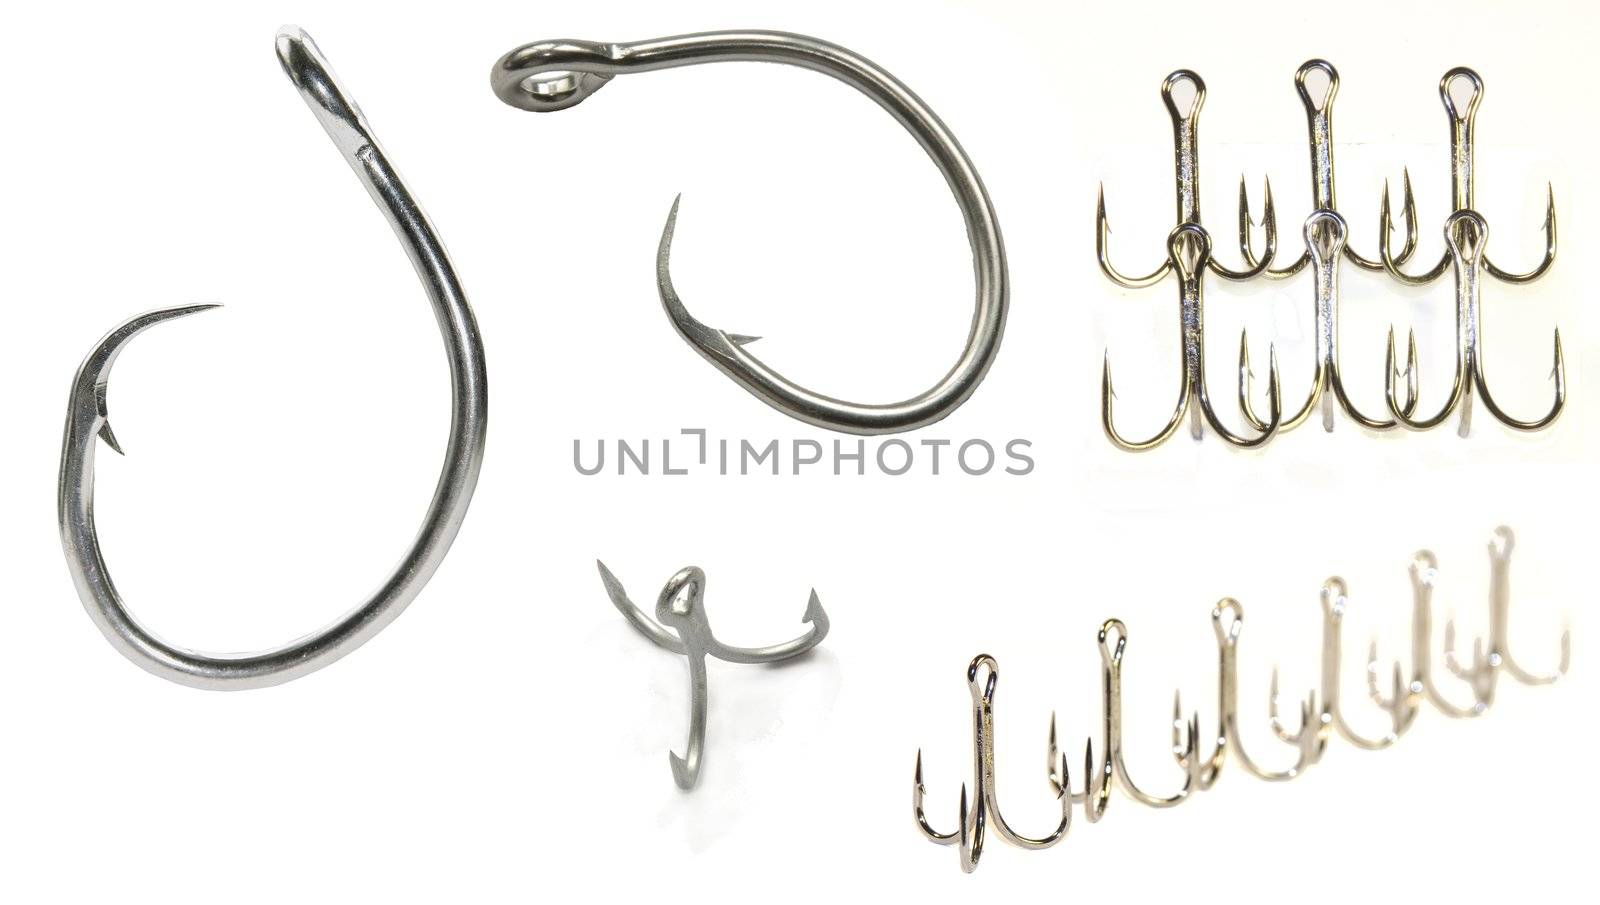 some kind of hooks using for sport fishing